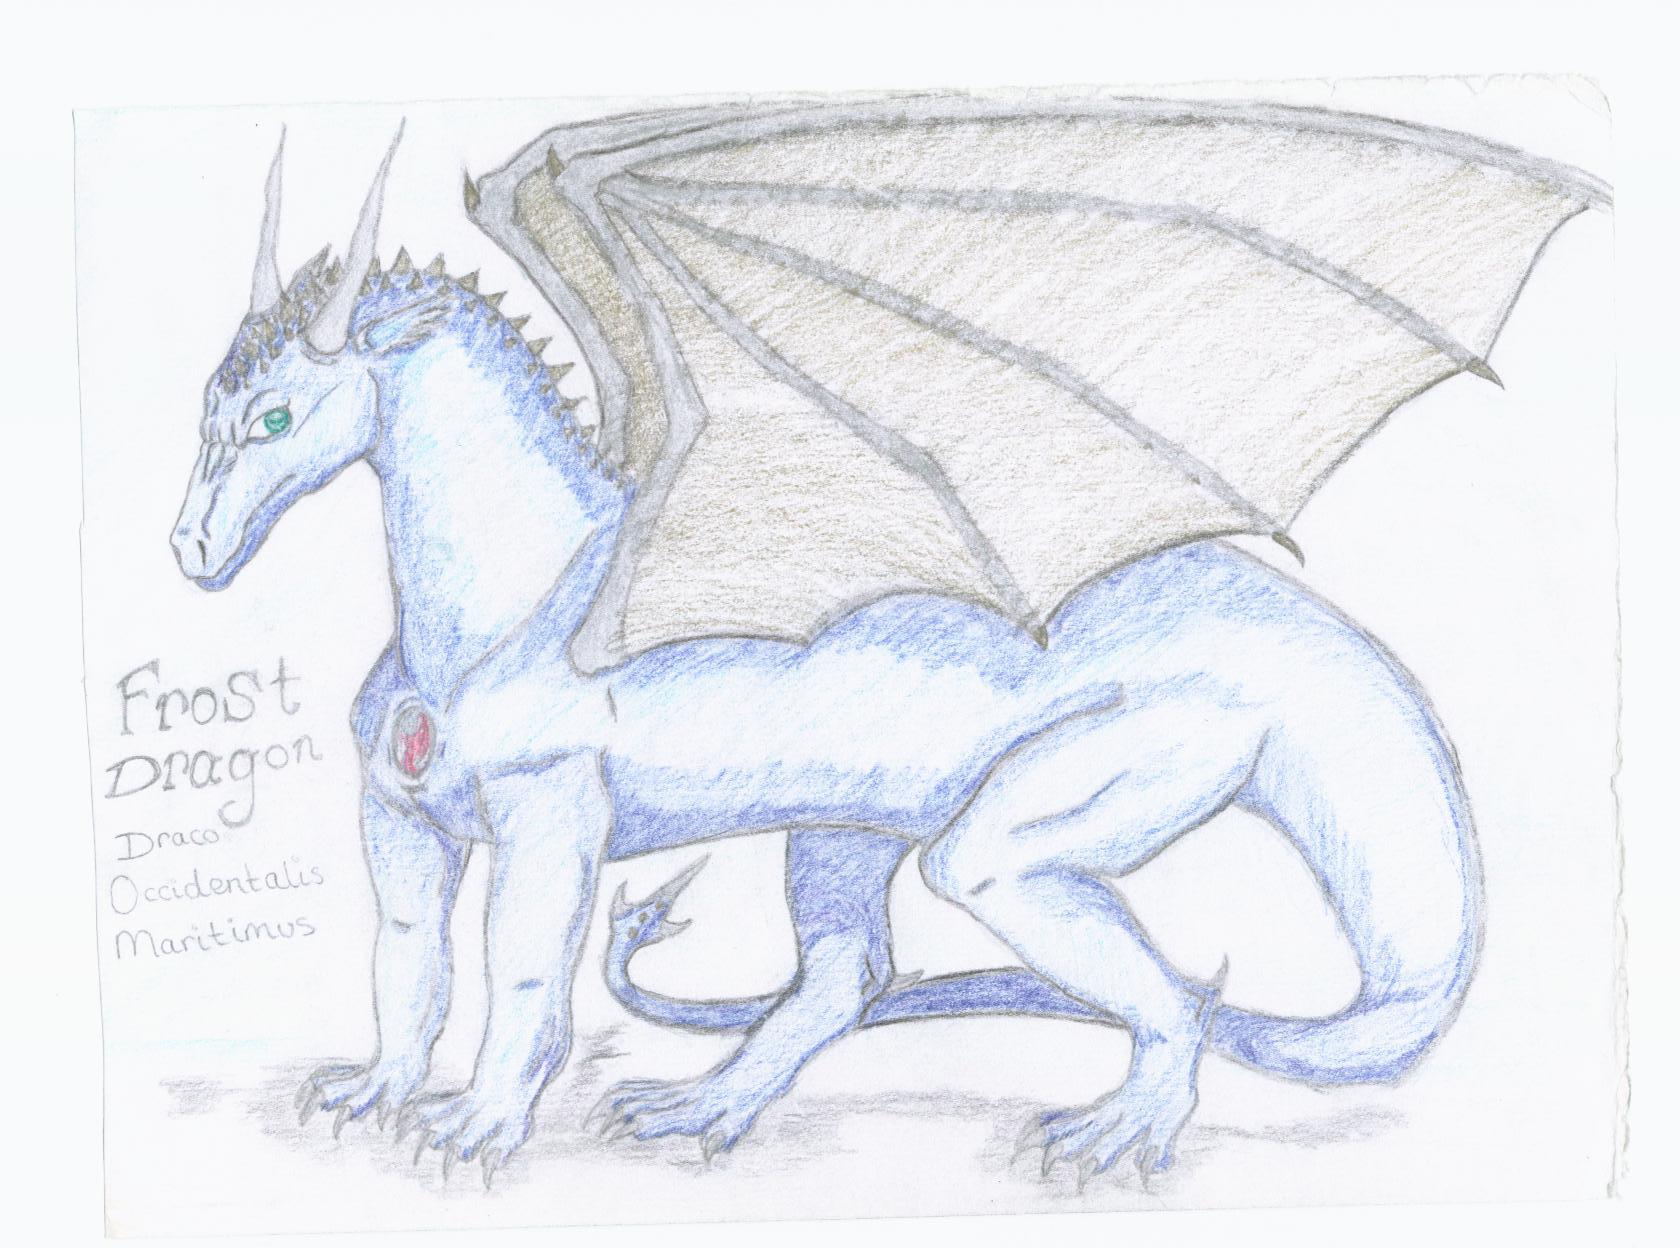 Frost Dragon by Frost_Dragon